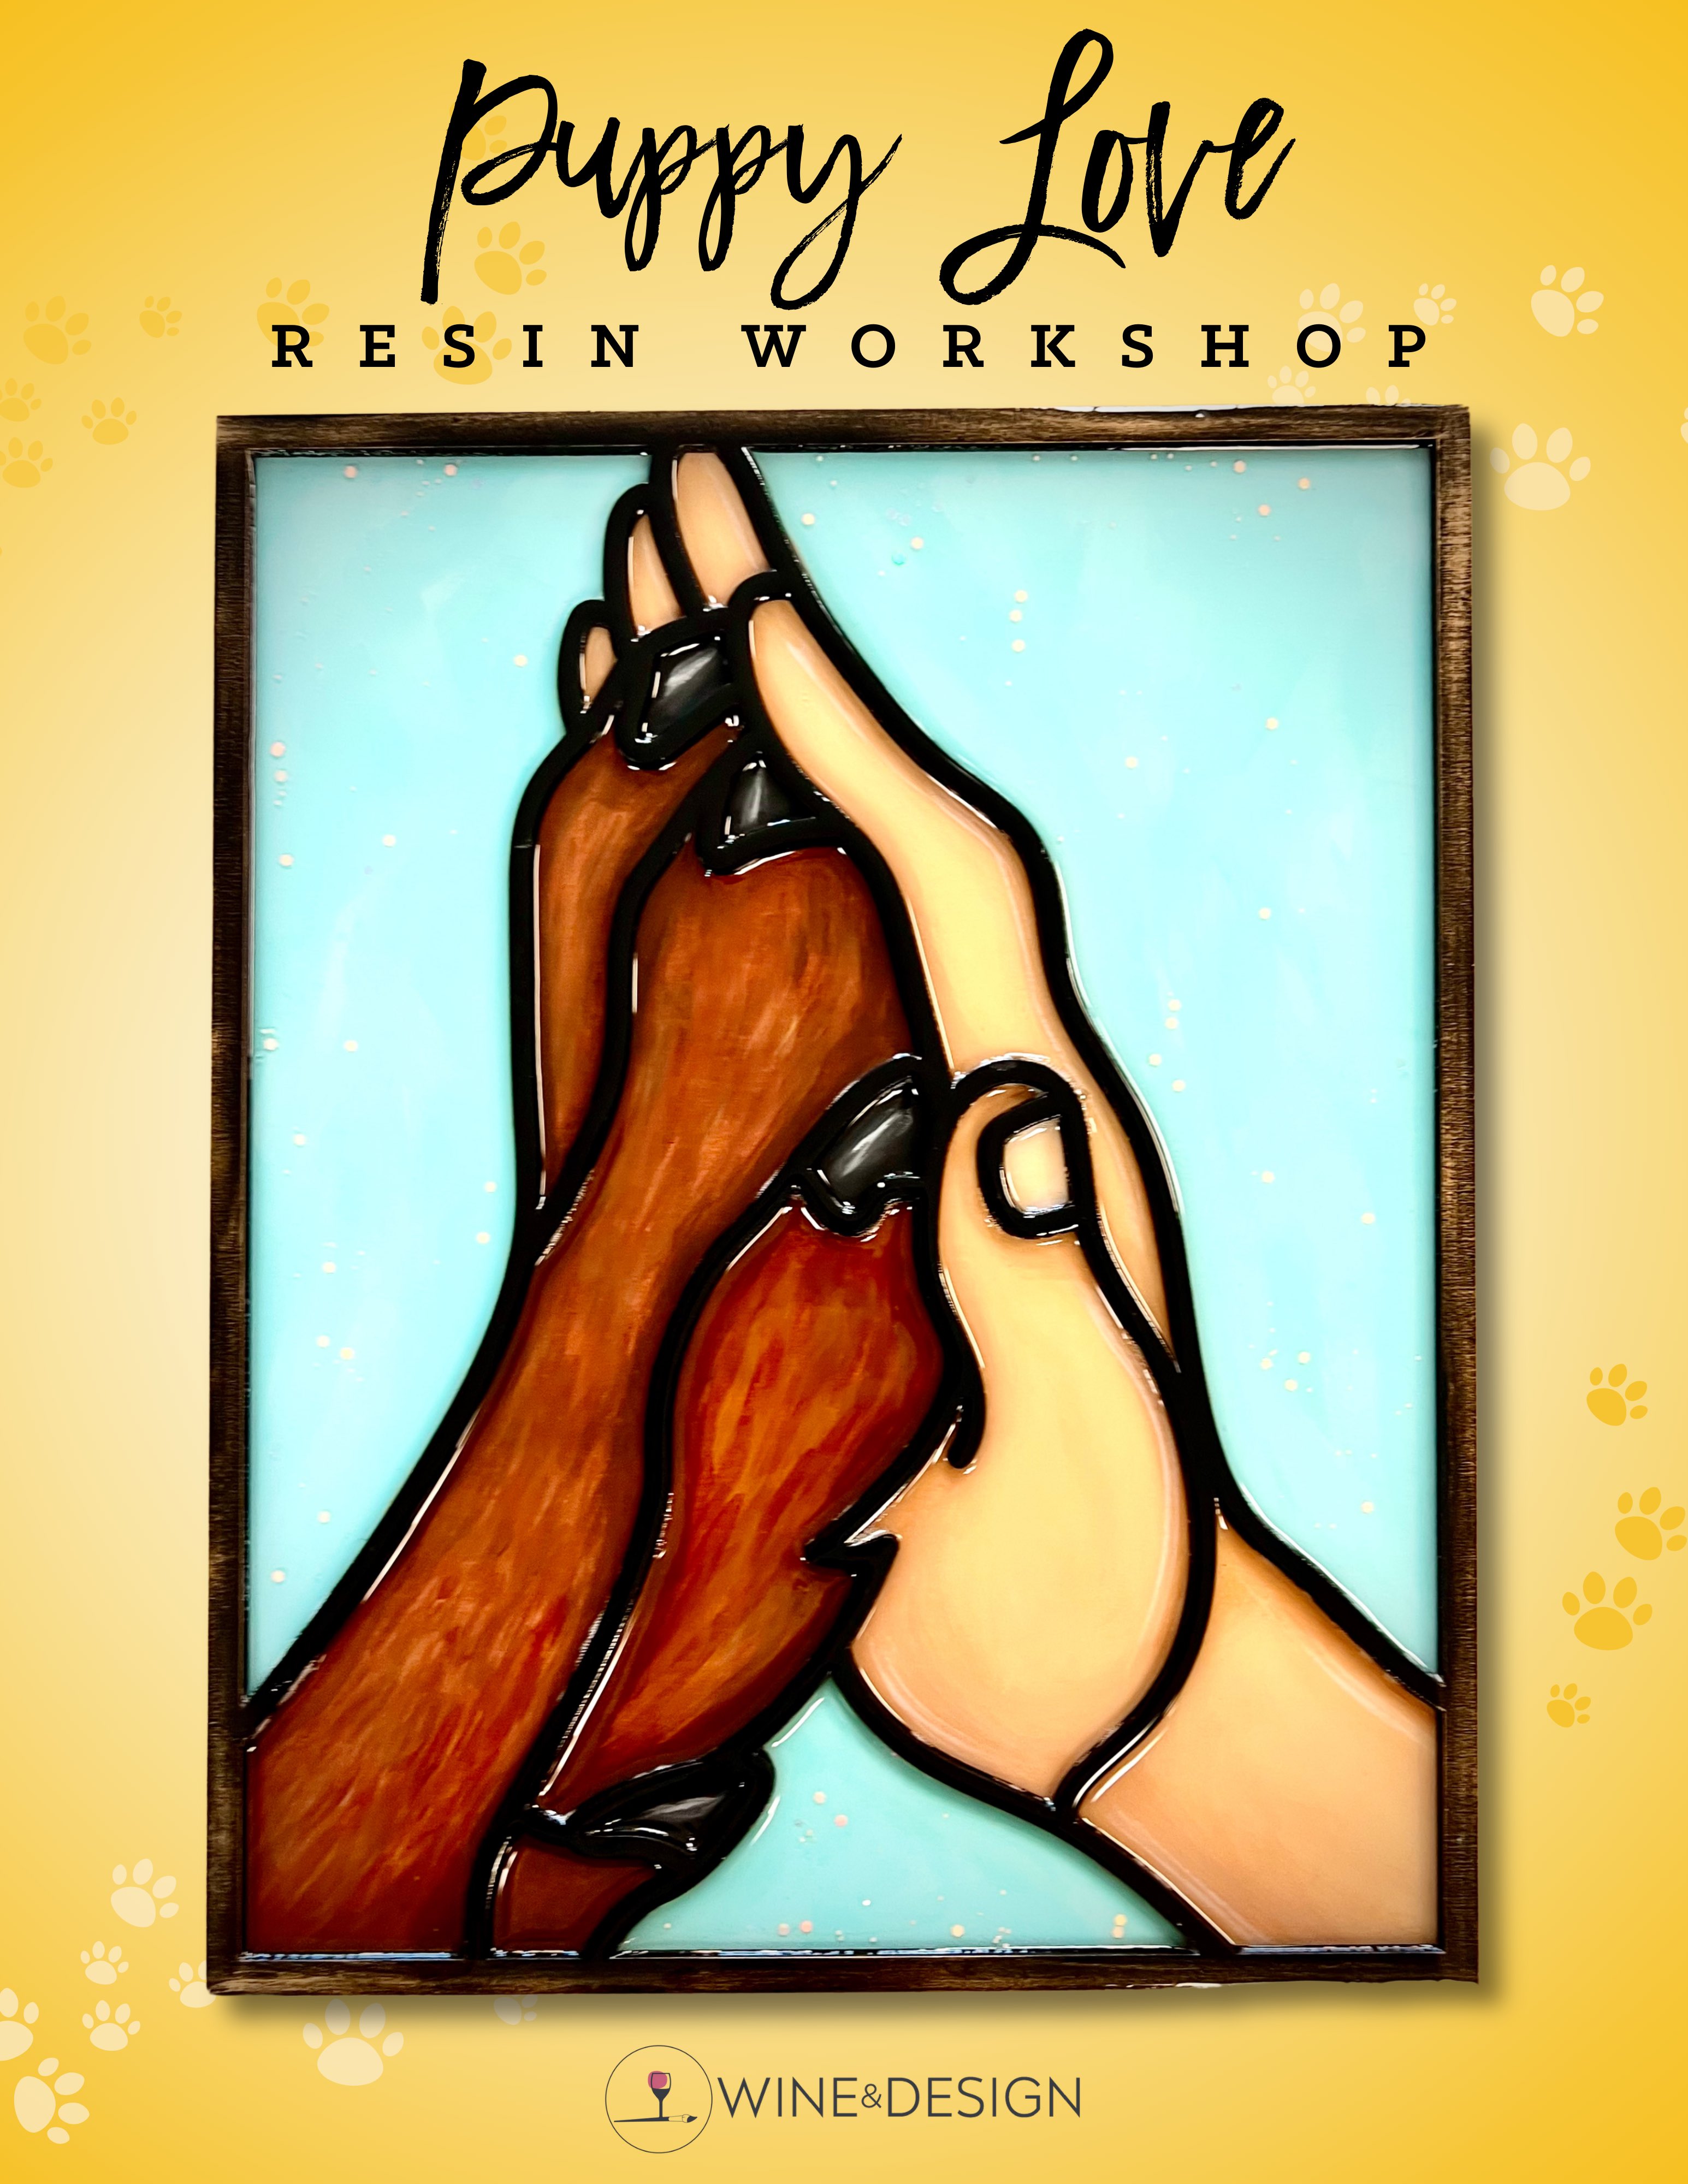 Puppy Love Resin Workshop | 3:00-5:00pm *MUST REGISTER BY MAY 26TH!